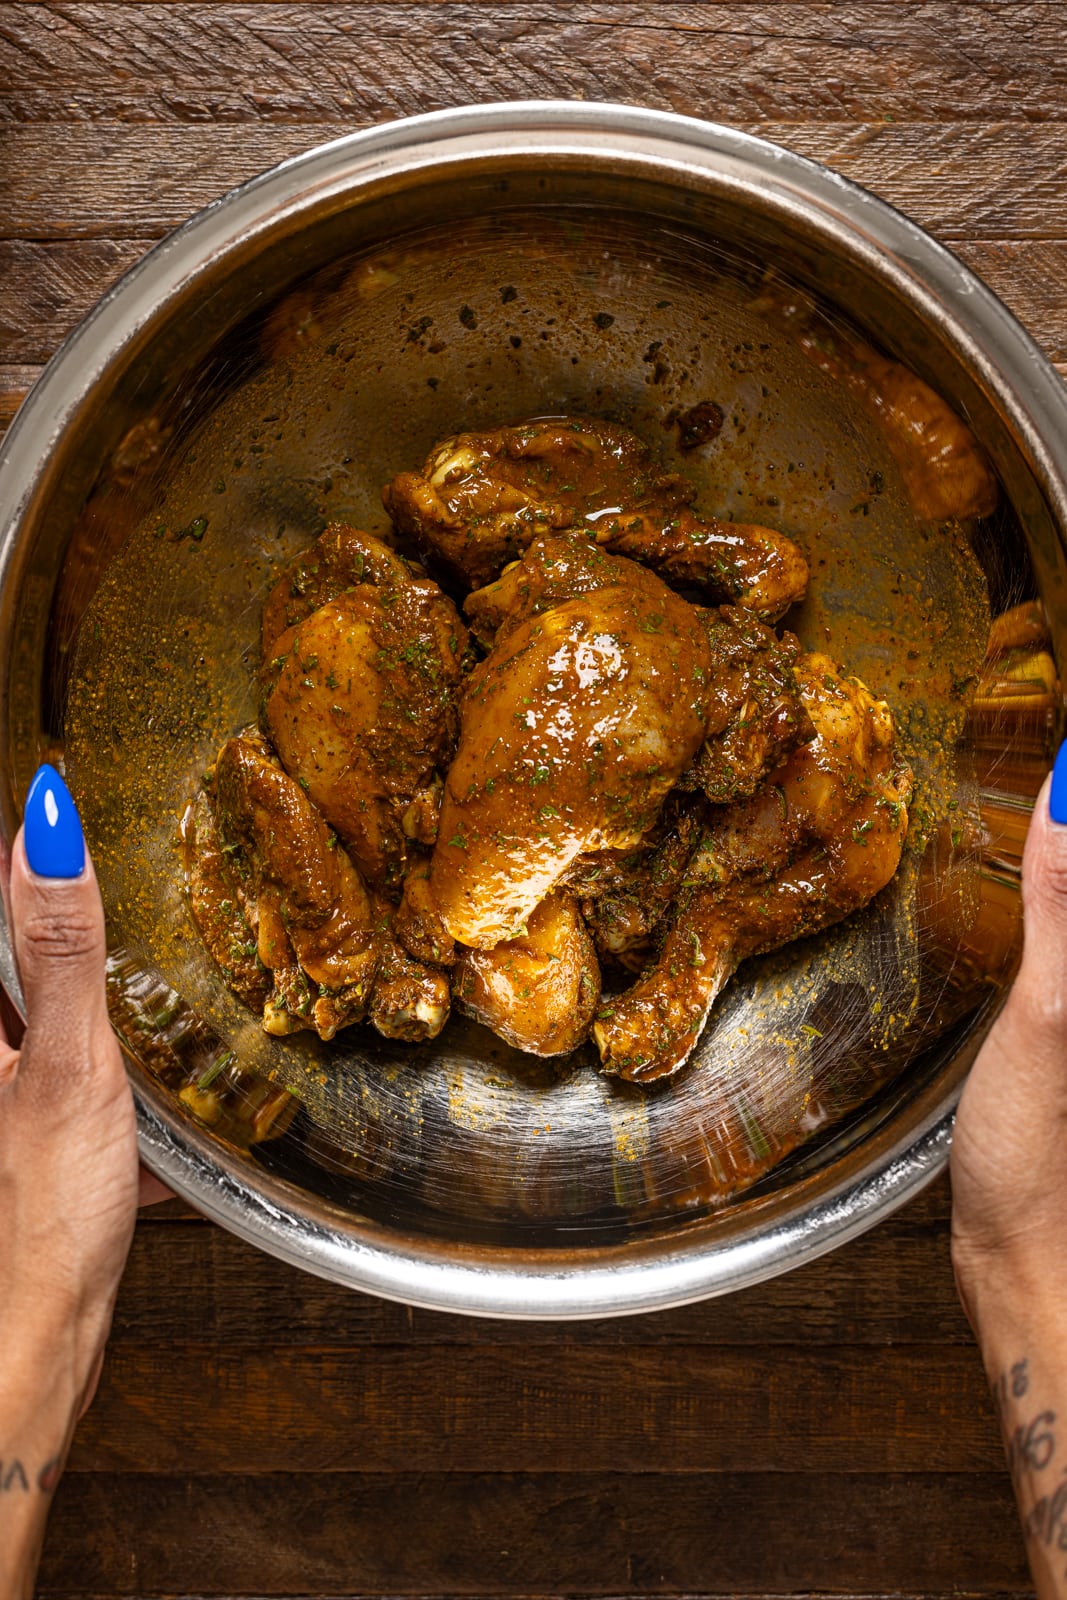 Marinated chicken in a silver bowl being held.